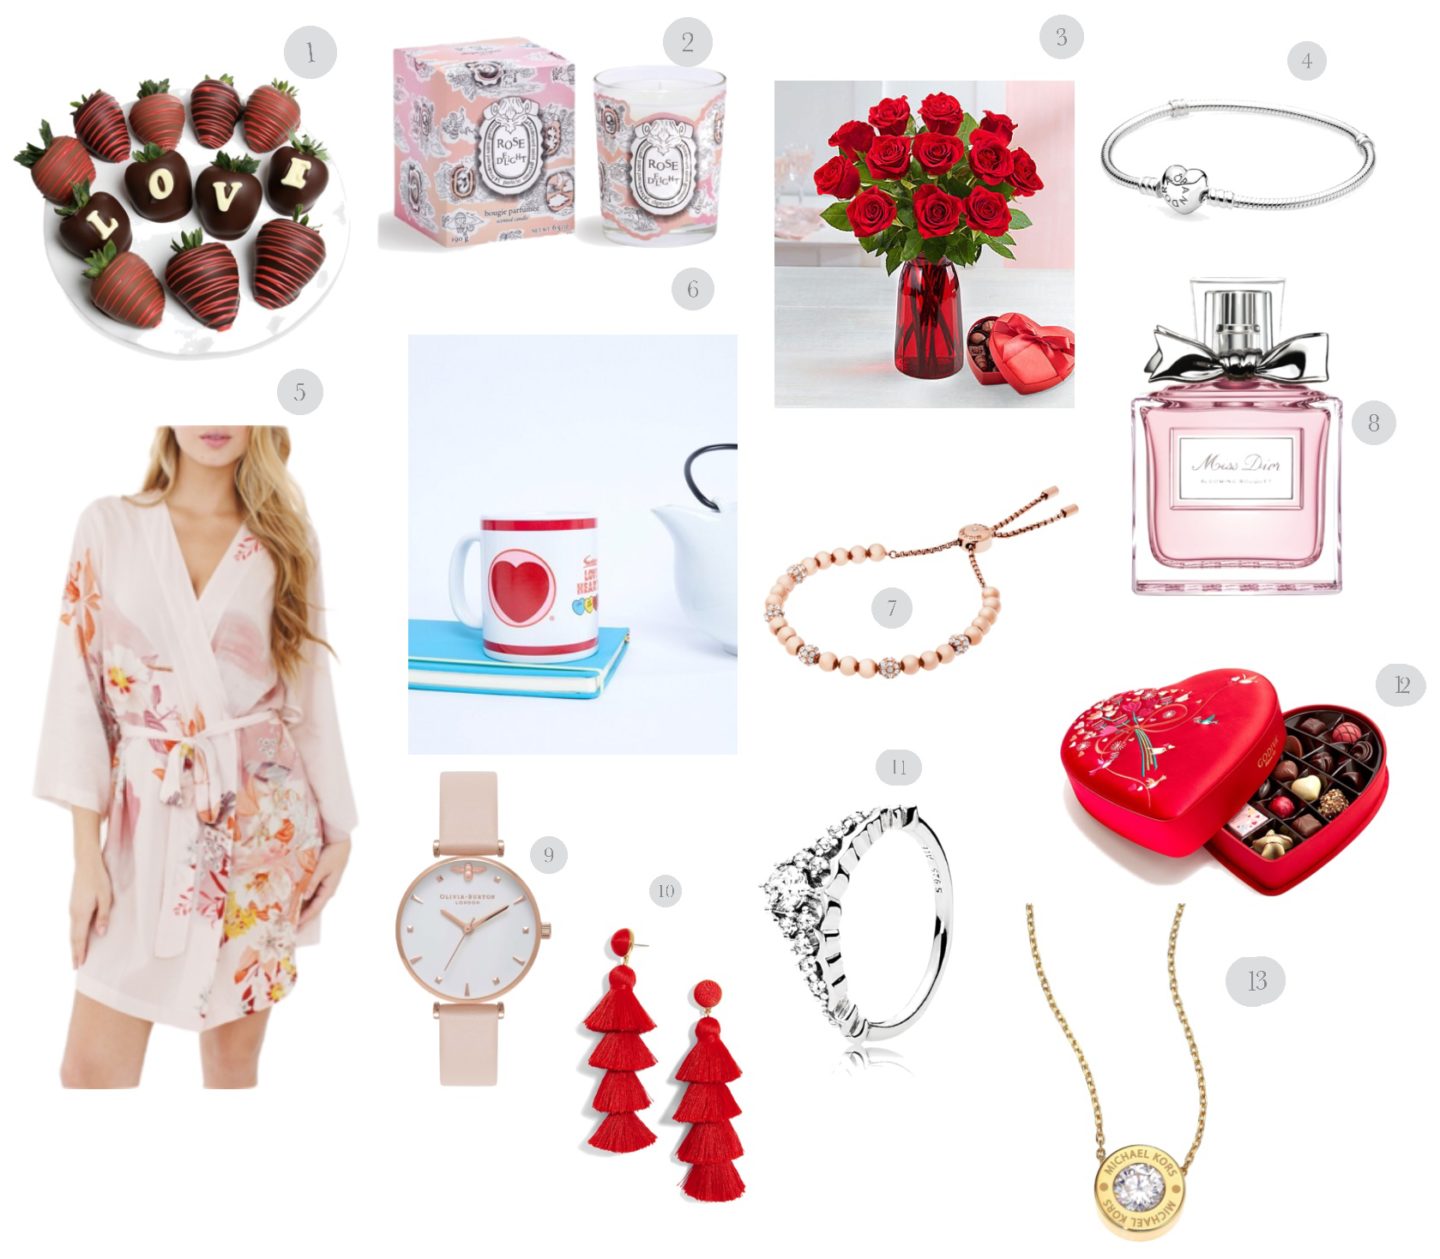 Valentines Day 2018... – PSLily Boutique Fashion Blog, PSLily Boutique on Instagram, Pinterest, Los Angeles fashion blogger, top fashion blog, best fashion blog, fashion & personal style blog, travel blog, travel blogger, LA fashion blogger, 2.8.18, Valentines Day 2018 gifts ideas, gifts for her, QUEEN BEE T-BAR WATCH - NUDE PEACH & ROSE GOLD, Pandora Fairytale Tiara Ring, Women's Dior Miss Dior Blooming Bouquet Eau De Toilette, Diptyque Rose Delight Candle, Godiva Heart Box Chocolate, 1 dozen red roses 1800flowers.com, collage, instagram: @pslilyboutique